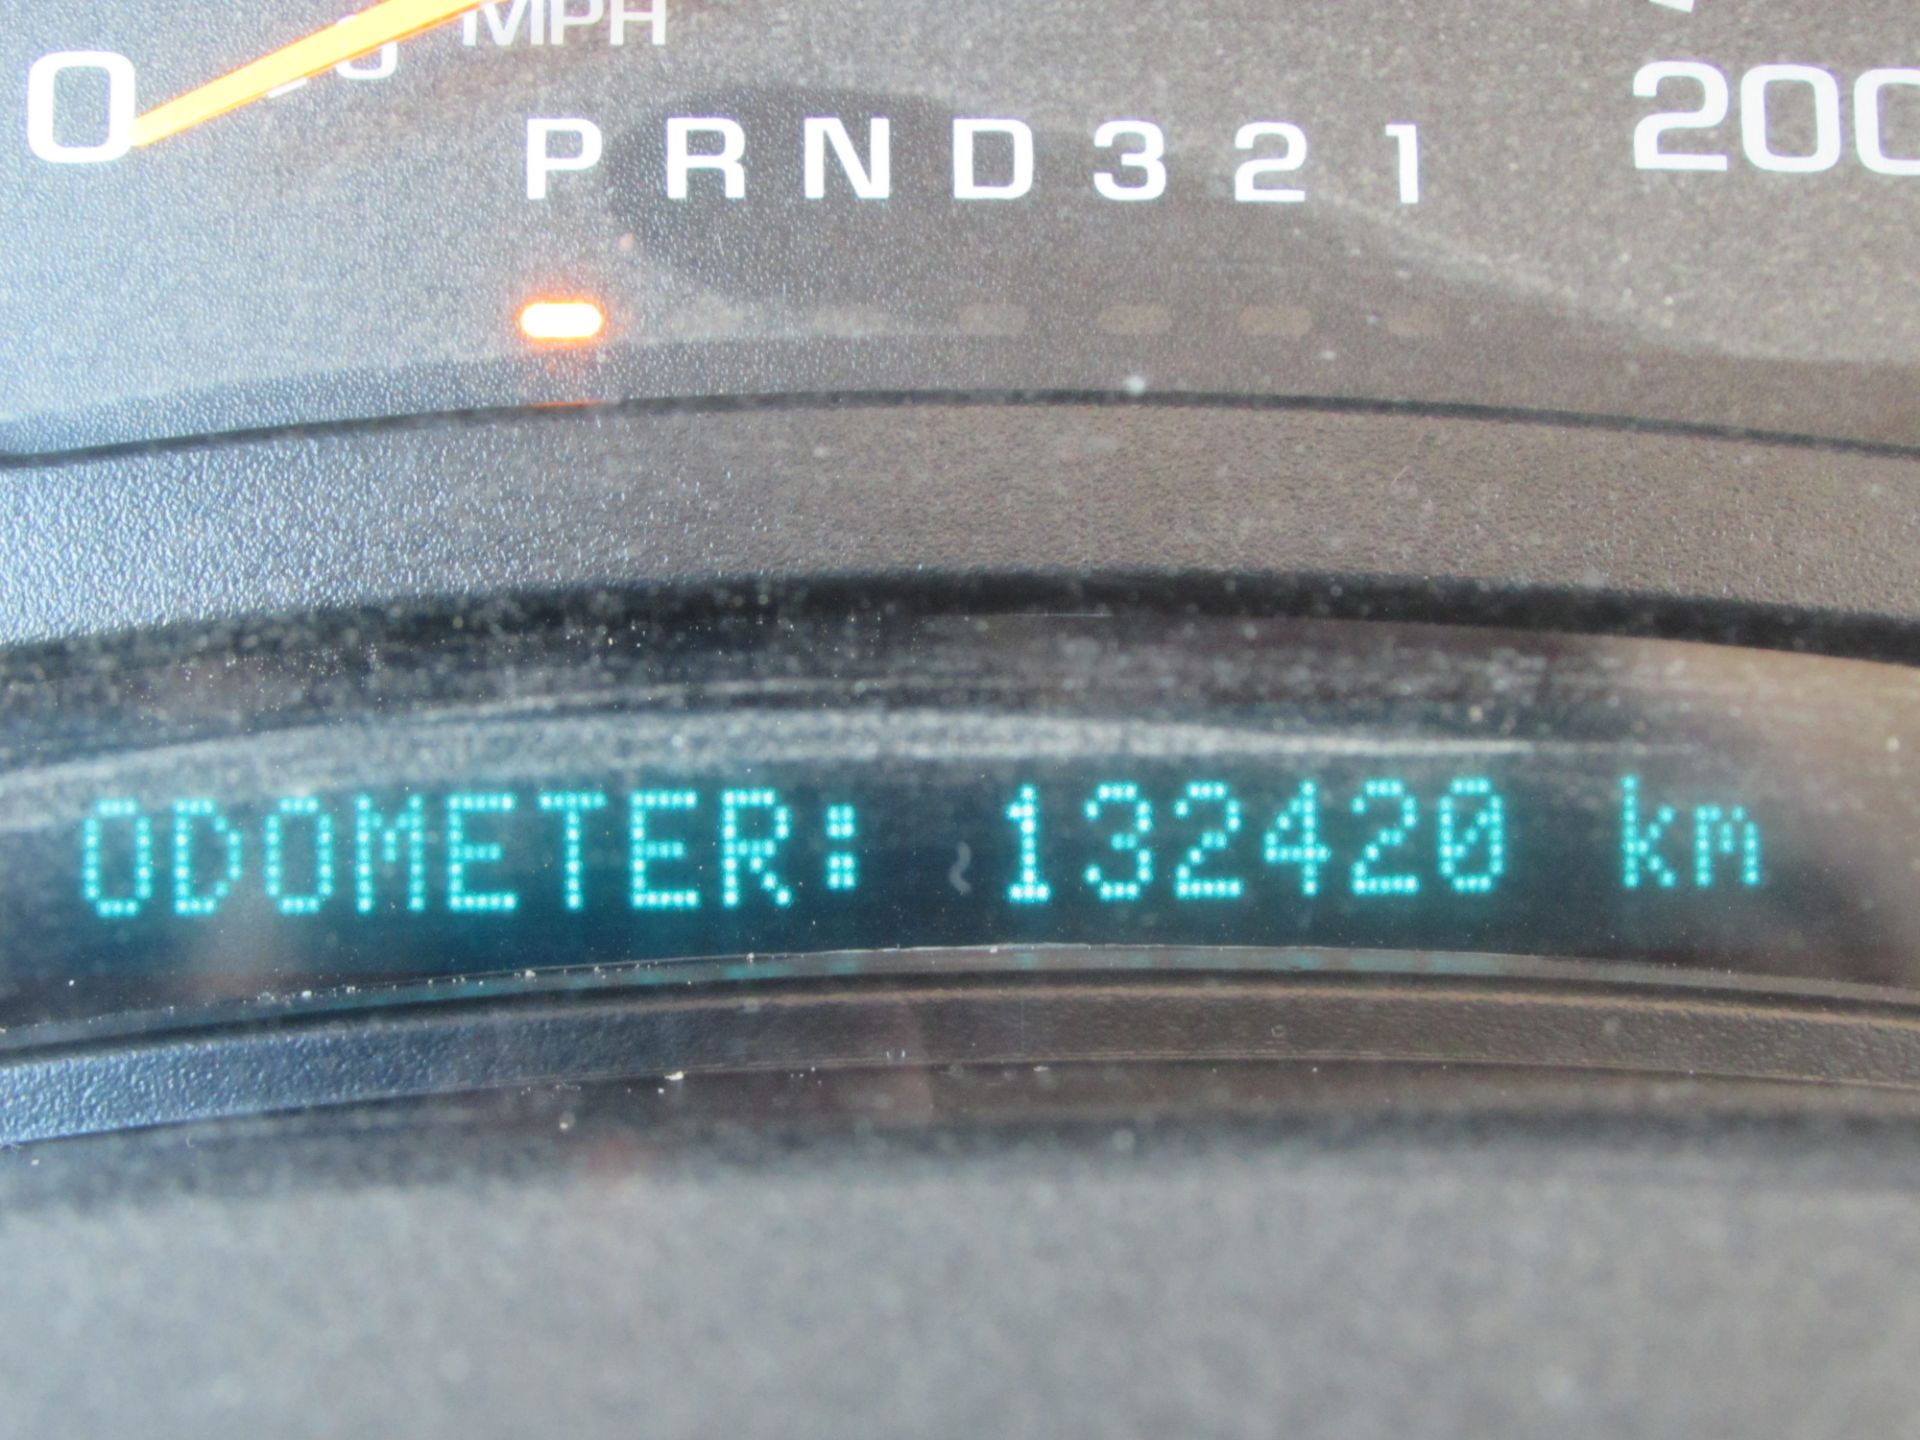 2007 CHEVY SILVERADO 2500HD PICK UP C/W EXTENDED CAB, 4X4, APPROX. 197,000KM (SHOWING ON METER) - Image 5 of 6